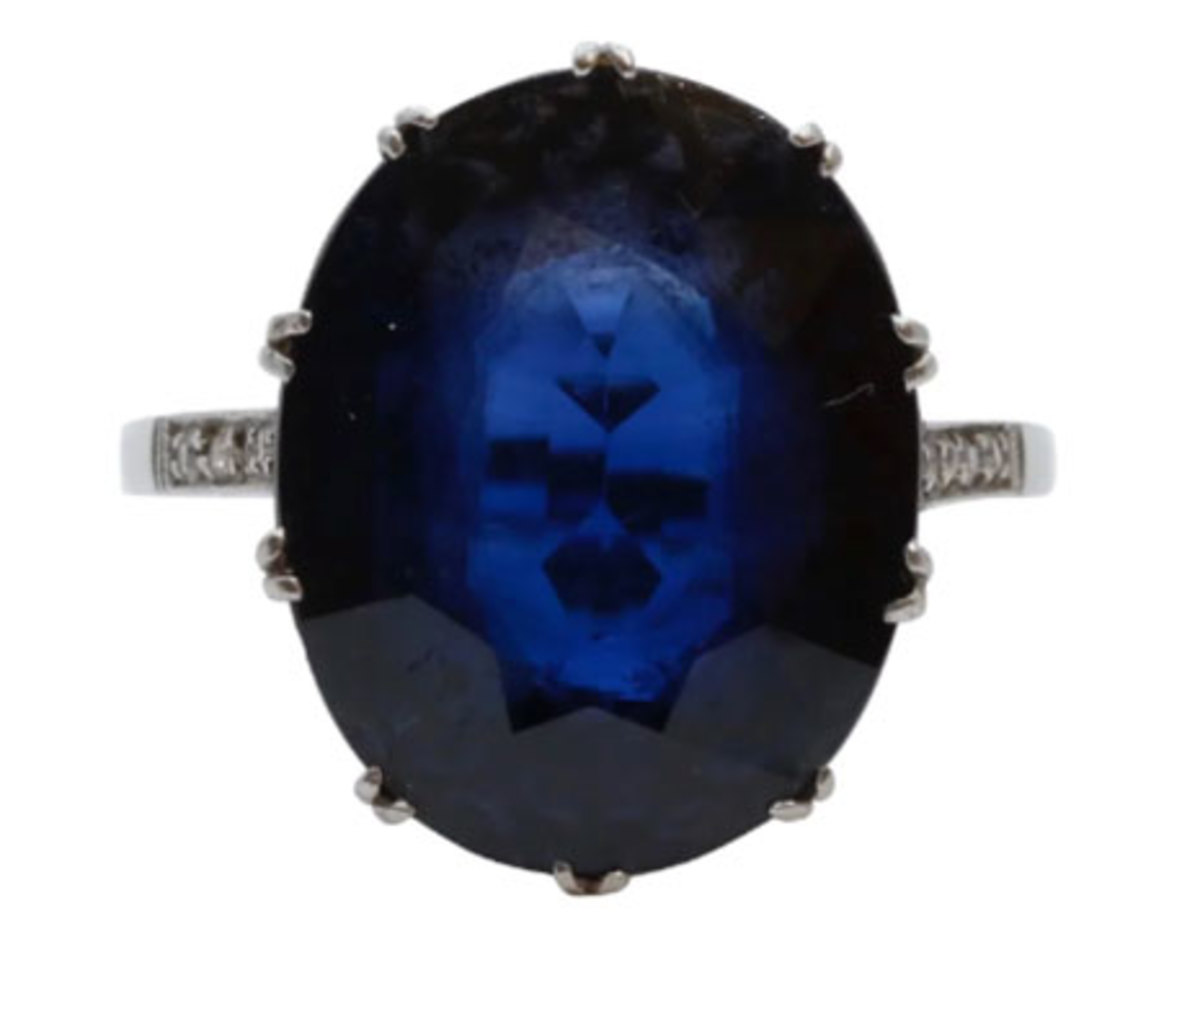 This Art Deco ring with its large synthetic sapphire hits on two trends for 2022: non-diamonds as the main stone and the fact that more consumers are being eco-conscious and buying synthetic stones; $1,530.